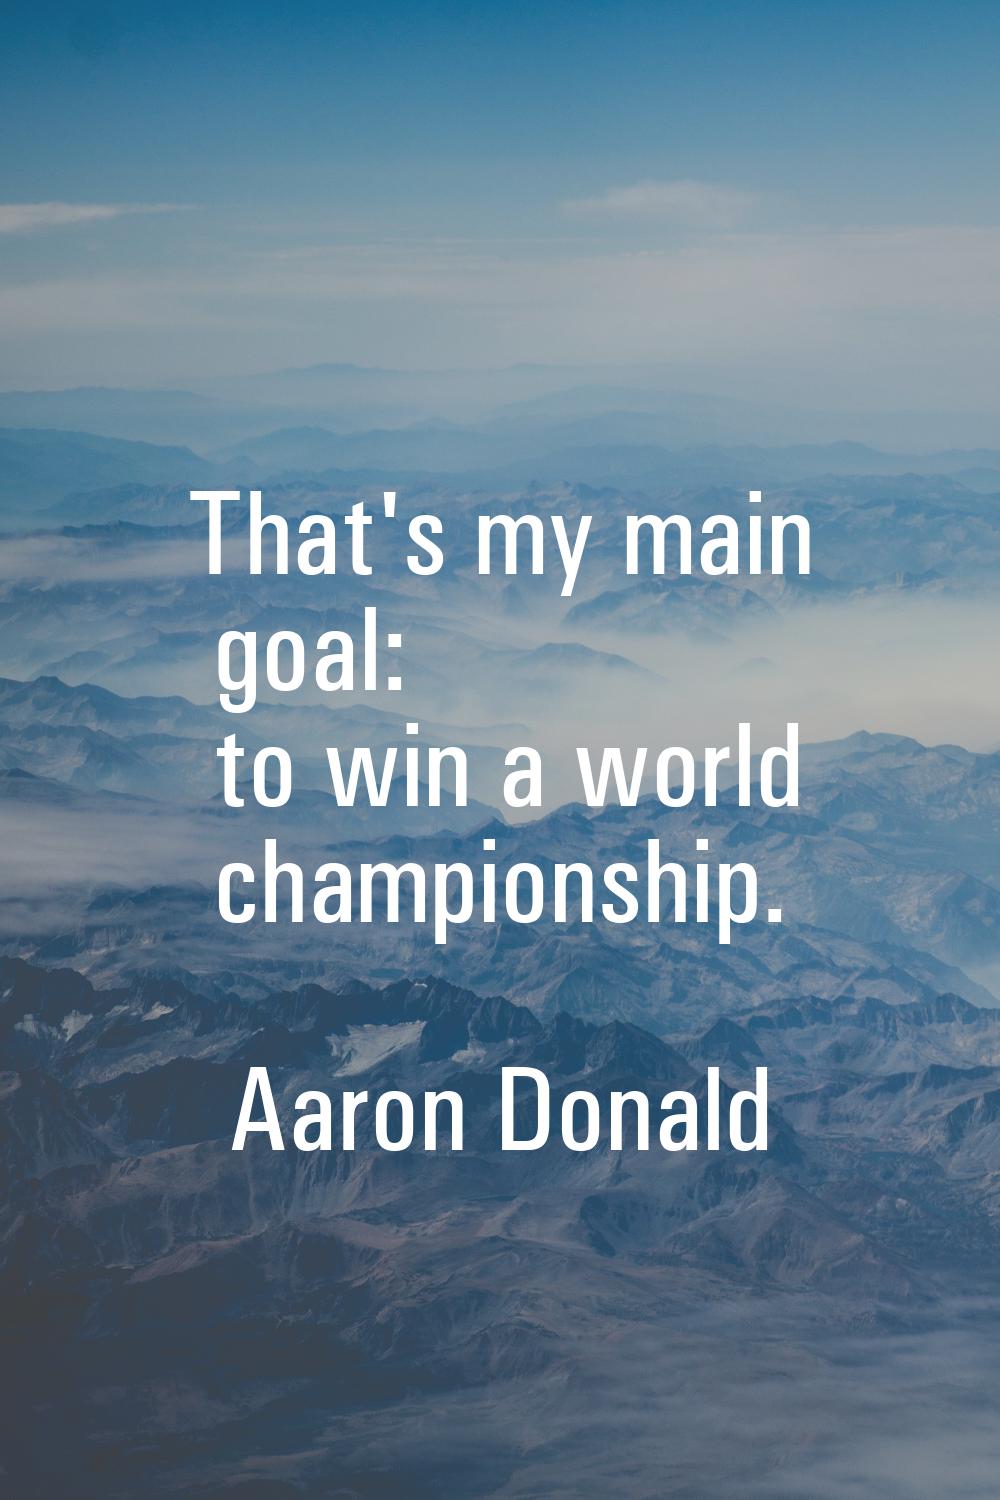 That's my main goal: to win a world championship.